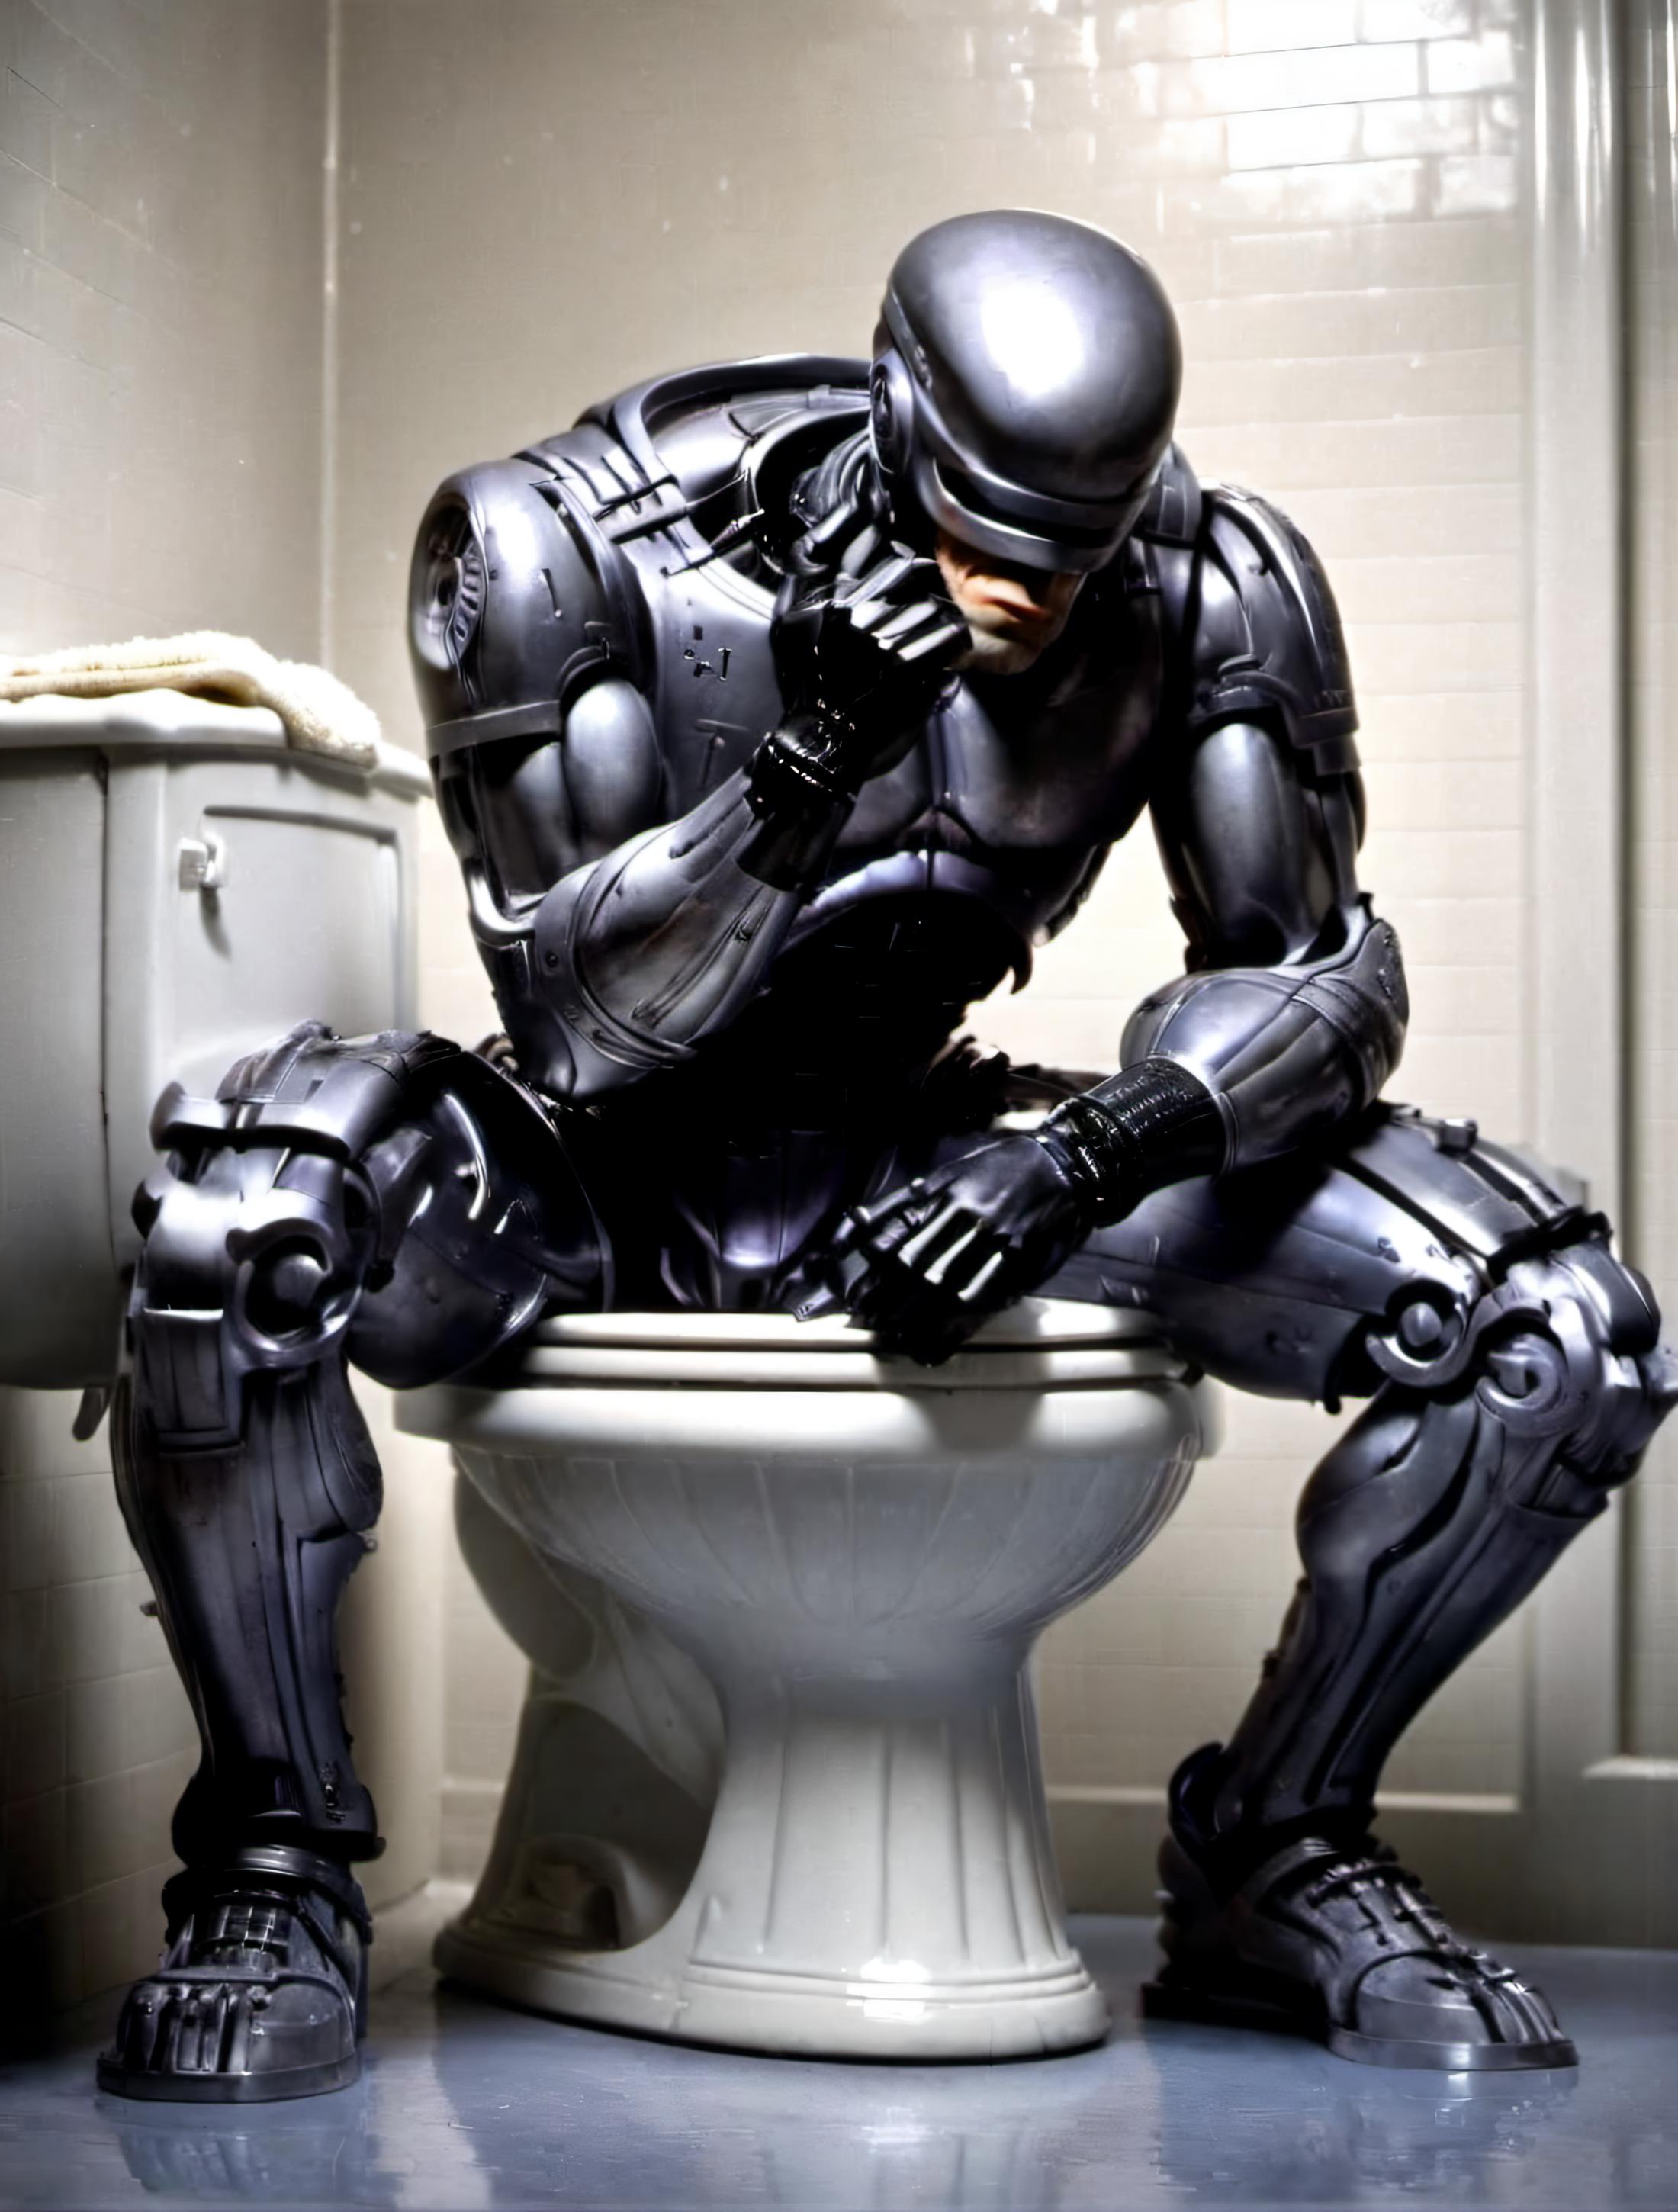 A RoboCop figure sitting on a toilet with his hand on his face.